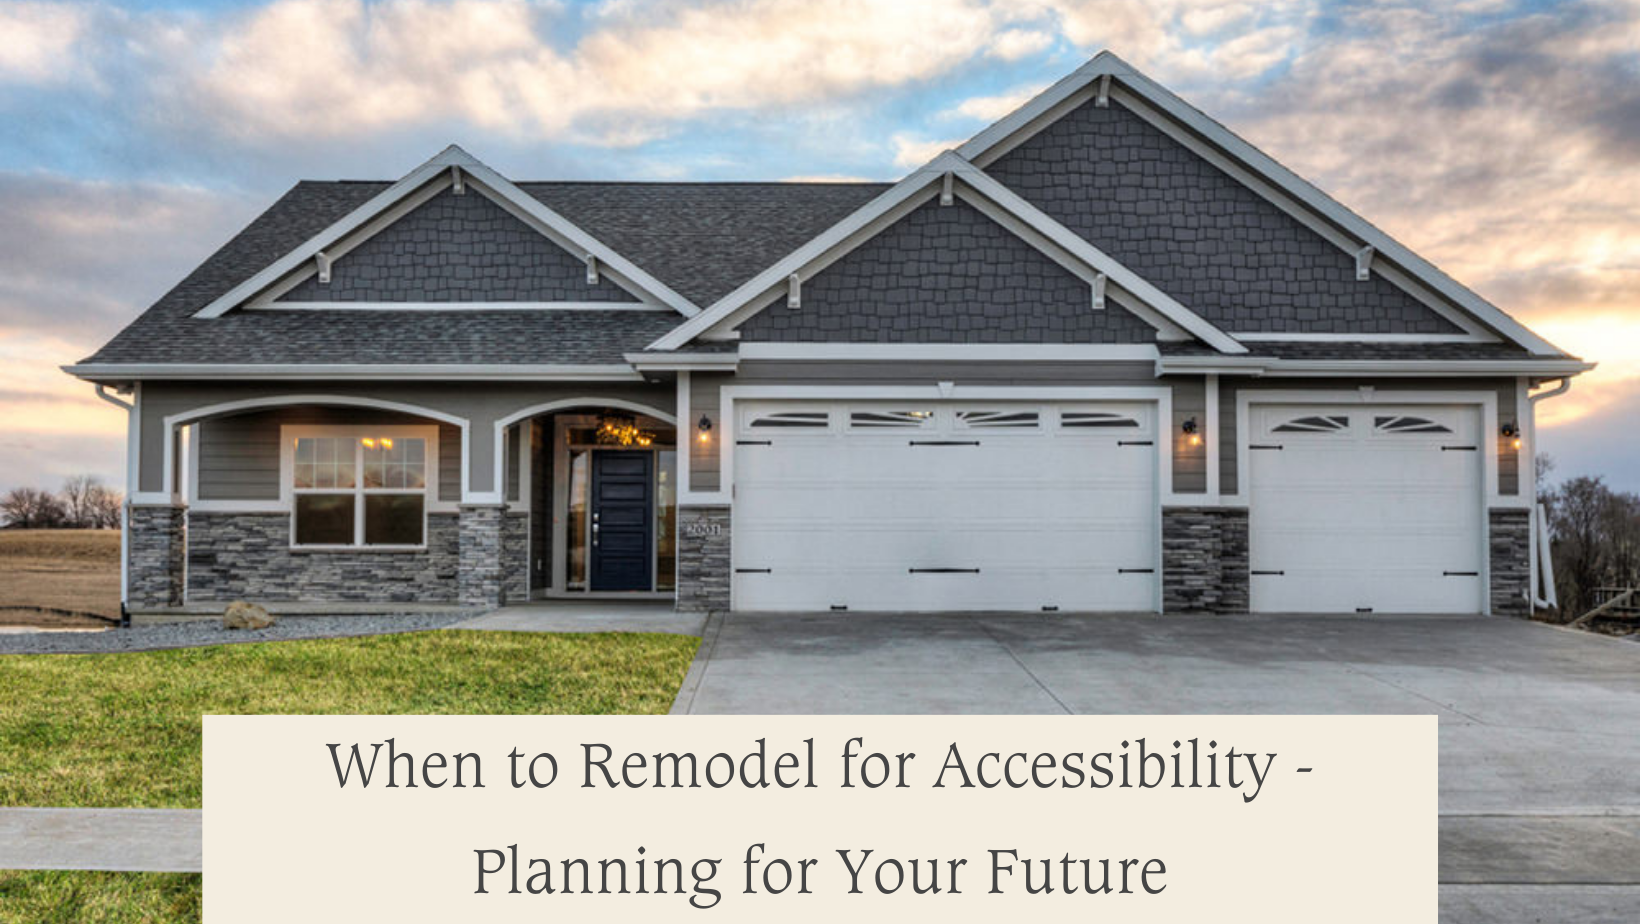 When to Remodel for Accessibility - Planning for your Future